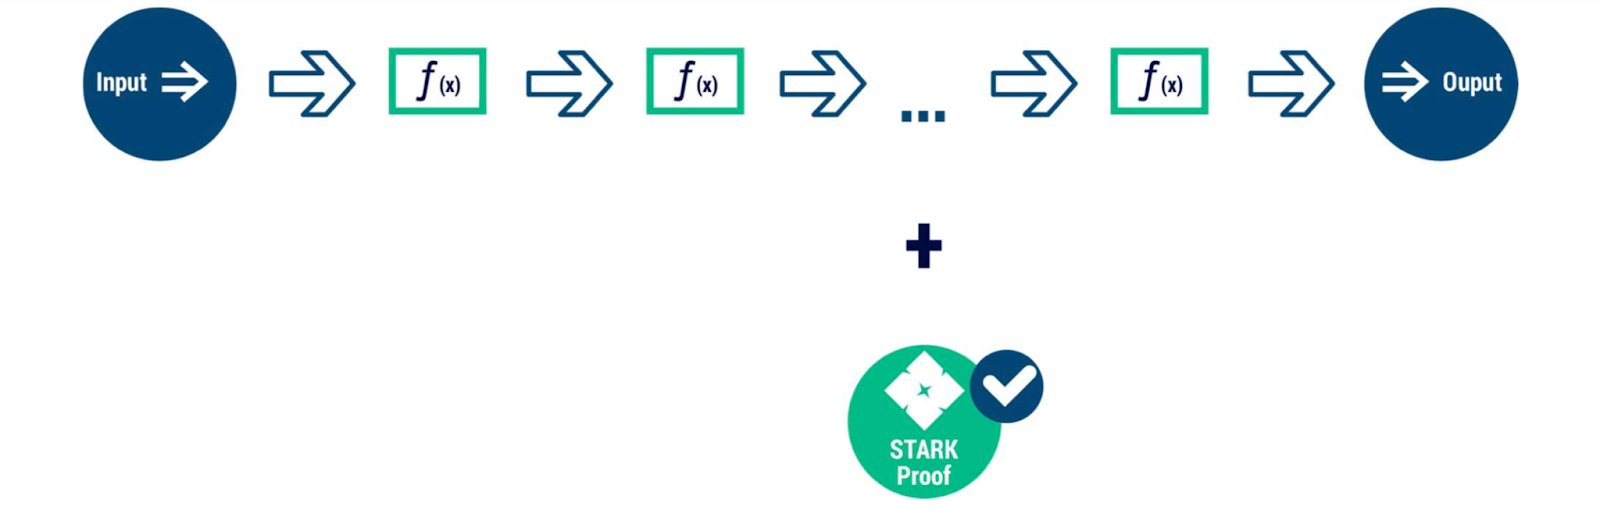 The base workflow of zk-stark combining 3 main components: Input, Stark Proof, and Output